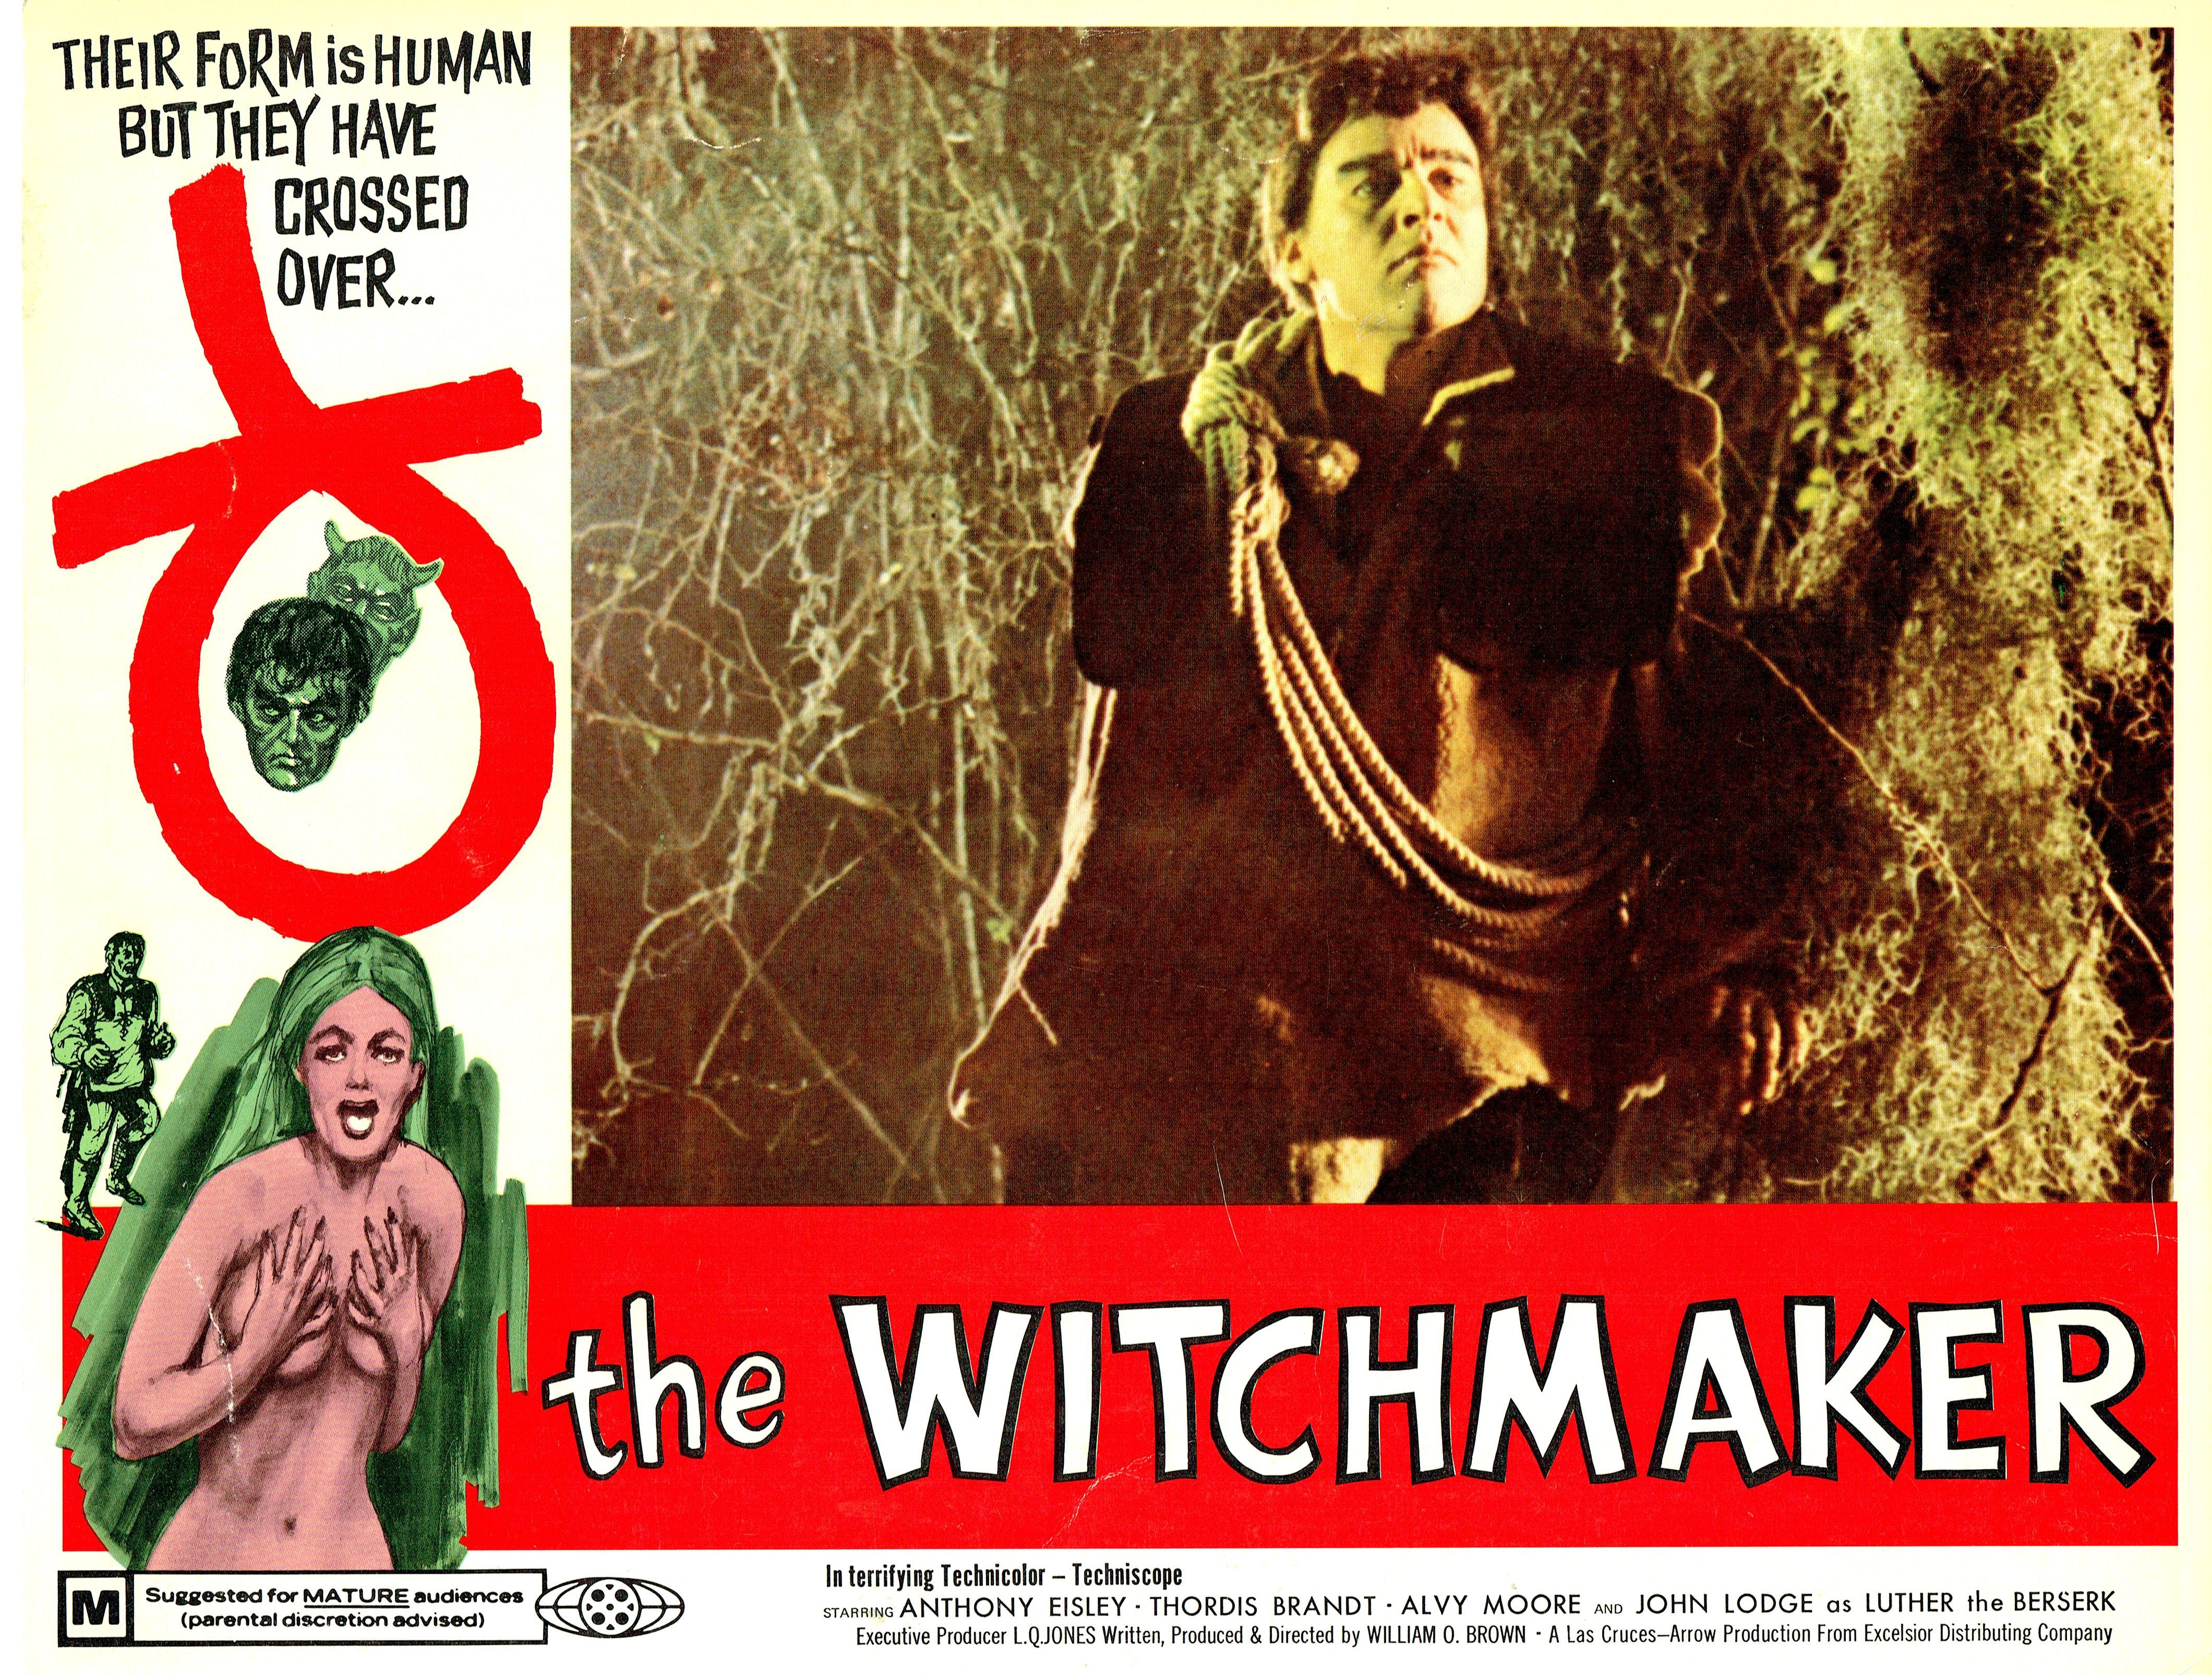 The Witchmaker (1969) Screenshot 1 